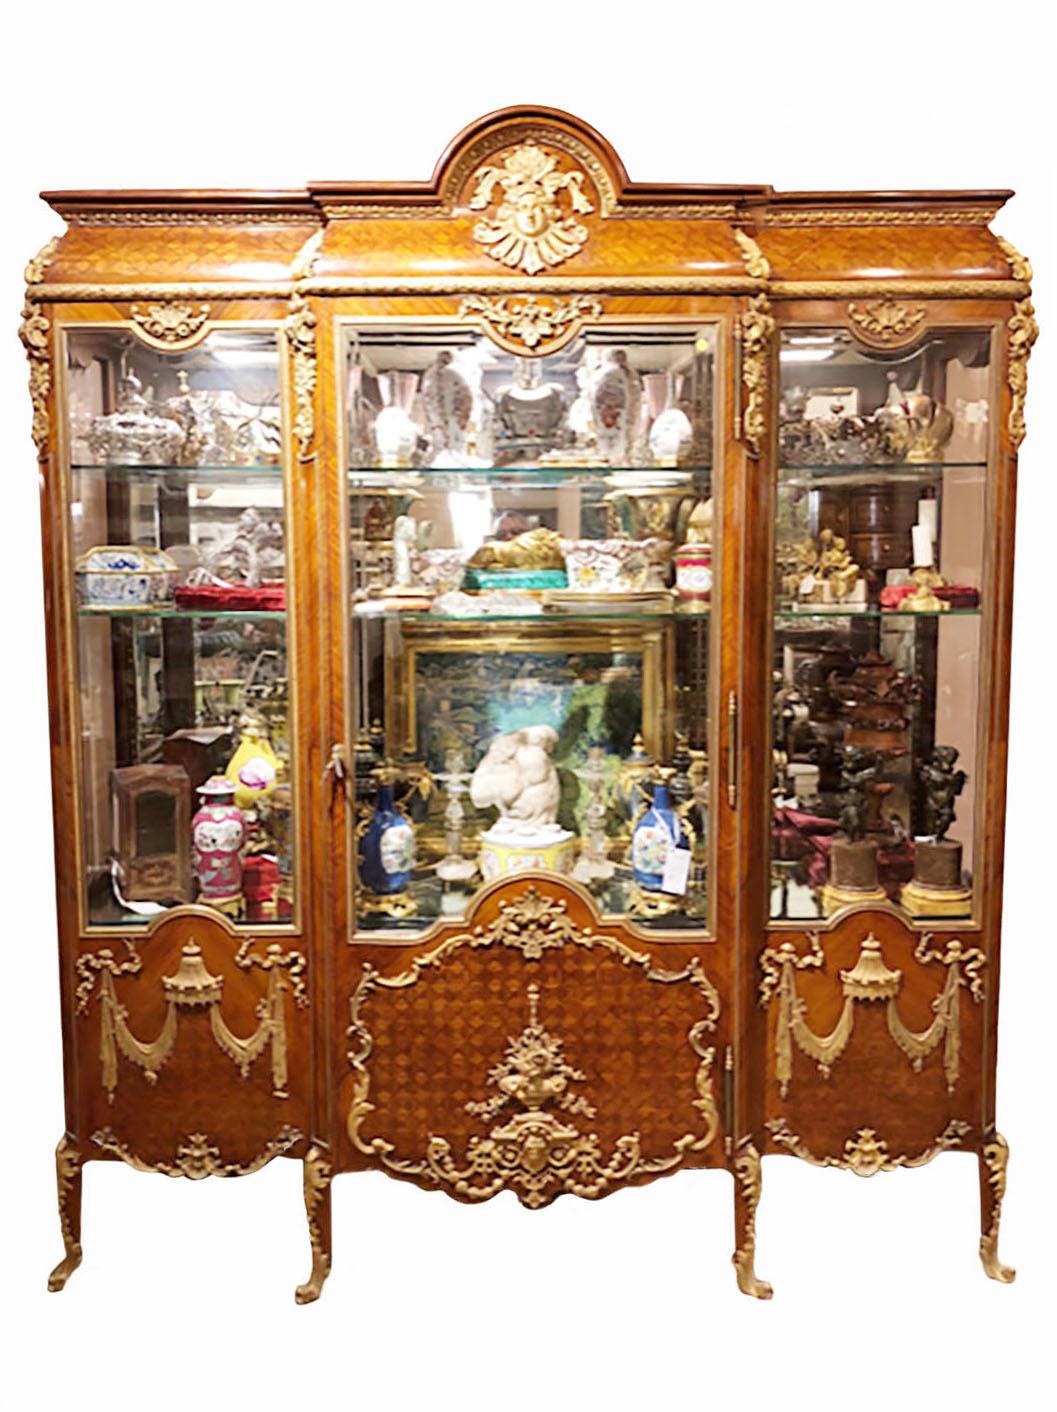 A Kingwood vitrine attributed to Maison G. Grimard, a well known French Ebenistes de art in the 19th century. The Ormolu mounted cabinet and frame are mounted with acanthus leaves and ornate floral motifs with cabriole legs. Circa 1890,